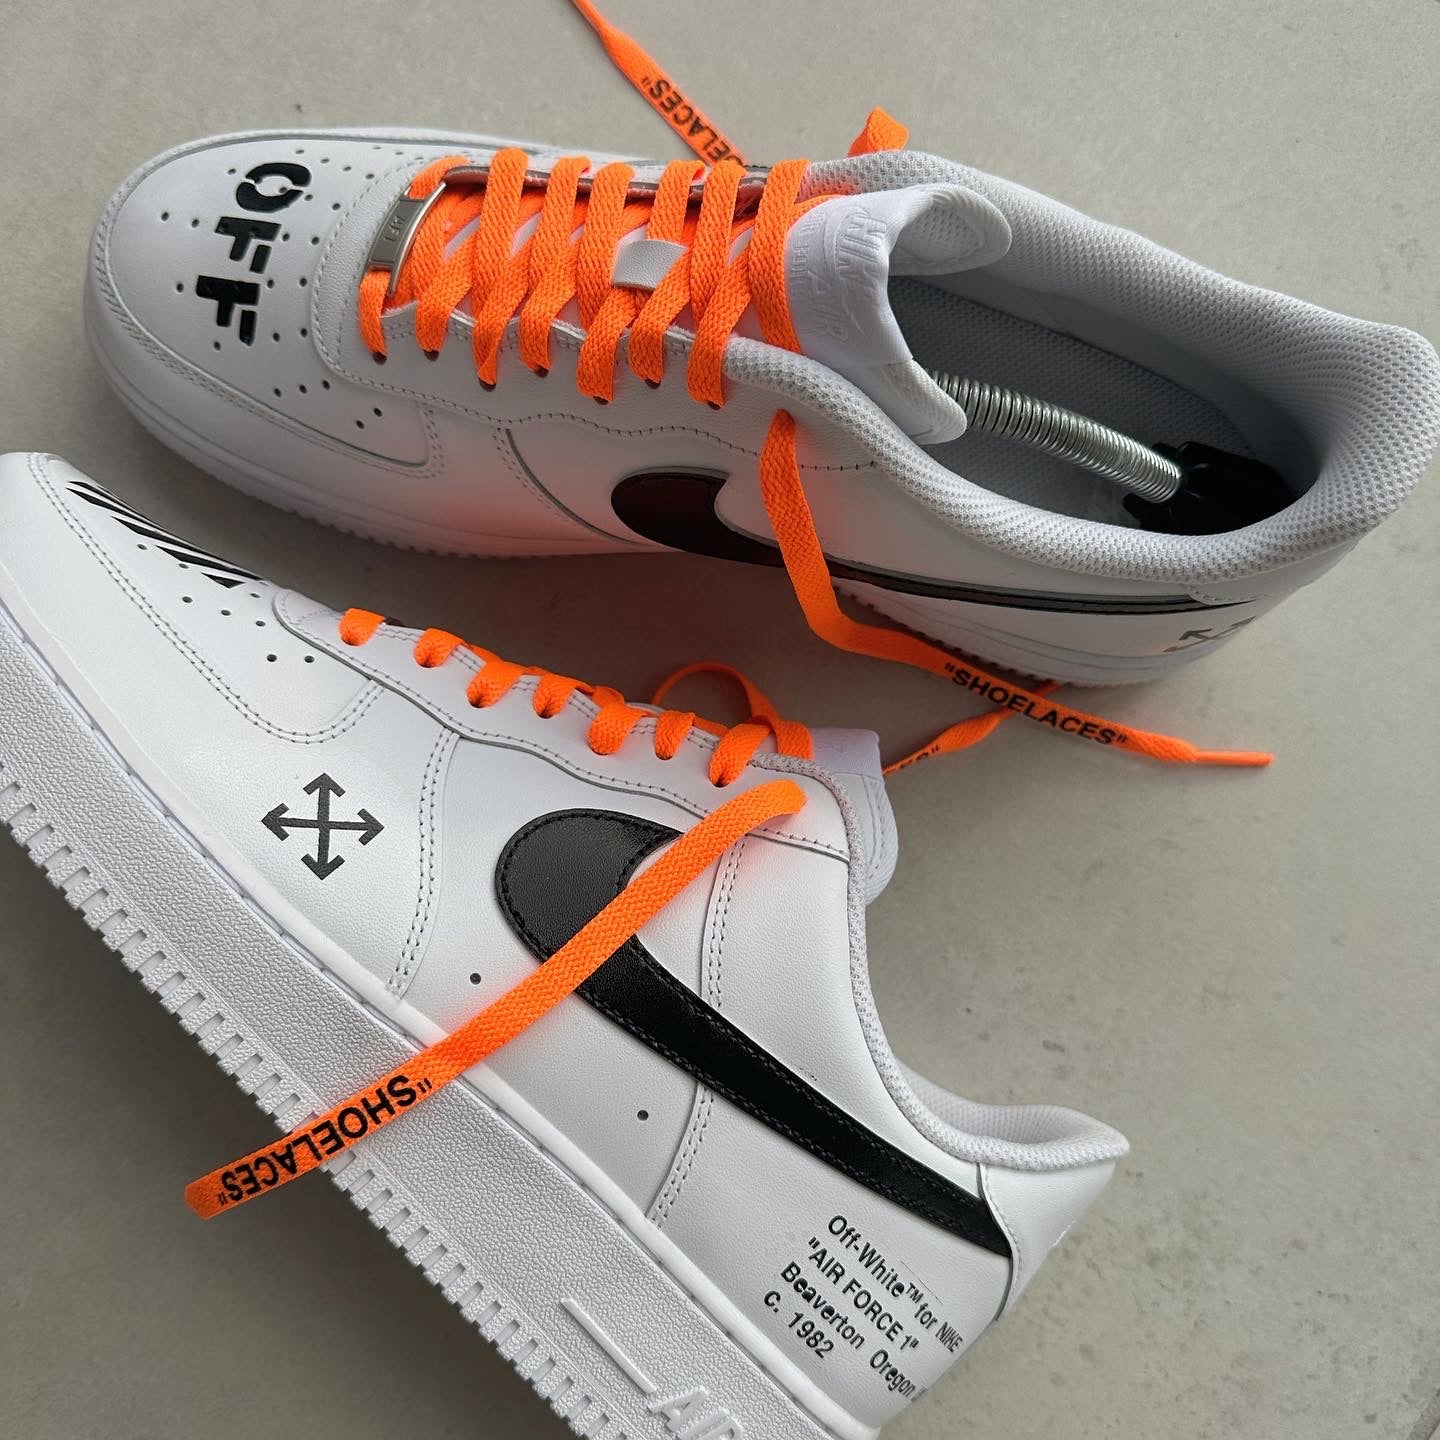 Off-White x Air Force 1 hand-painted customs